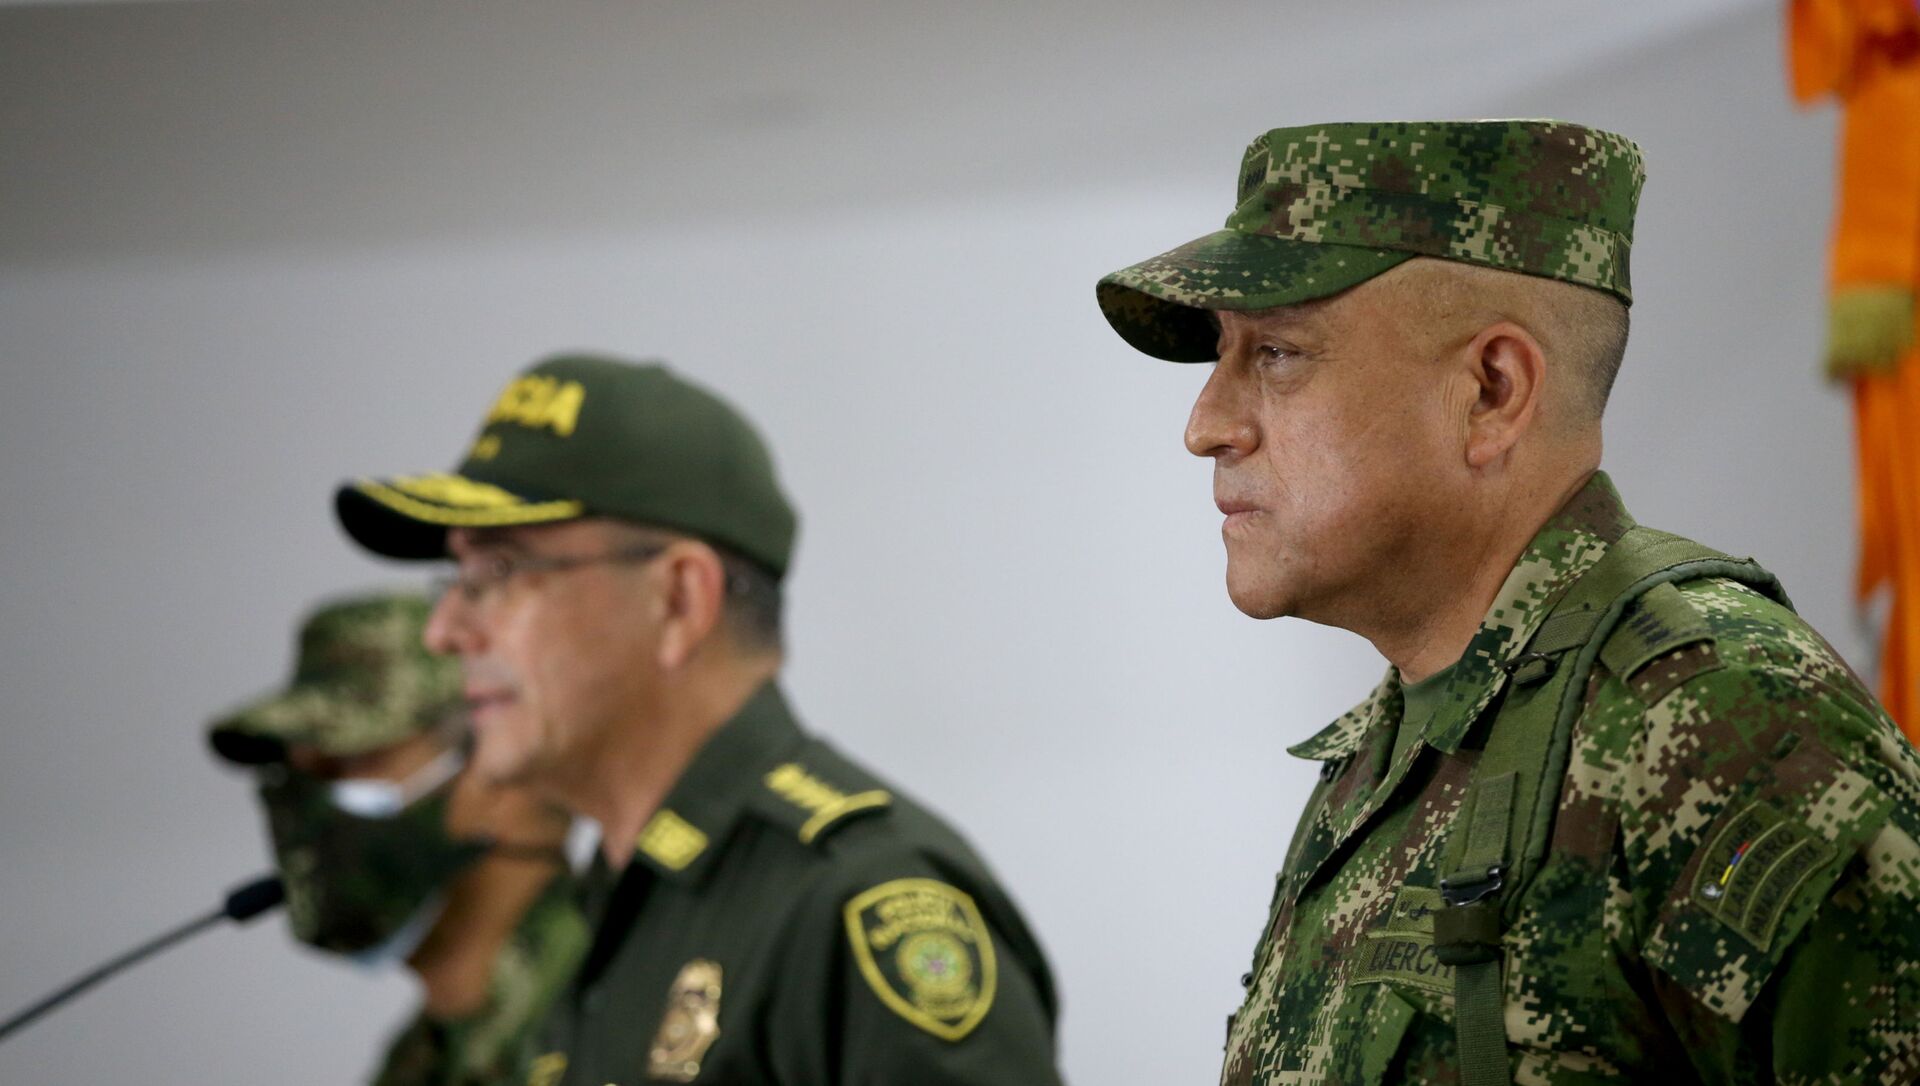 Commander of the Colombian Military Forces, General Luis Fernando Navarro listens as Colombia's National Police Director General Jorge Luis Vargas speaks during a news conference about the participation of several Colombians in the assassination of Haitian President Jovenel Moise, in Bogota, Colombia July 9, 2021. - Sputnik International, 1920, 04.08.2021